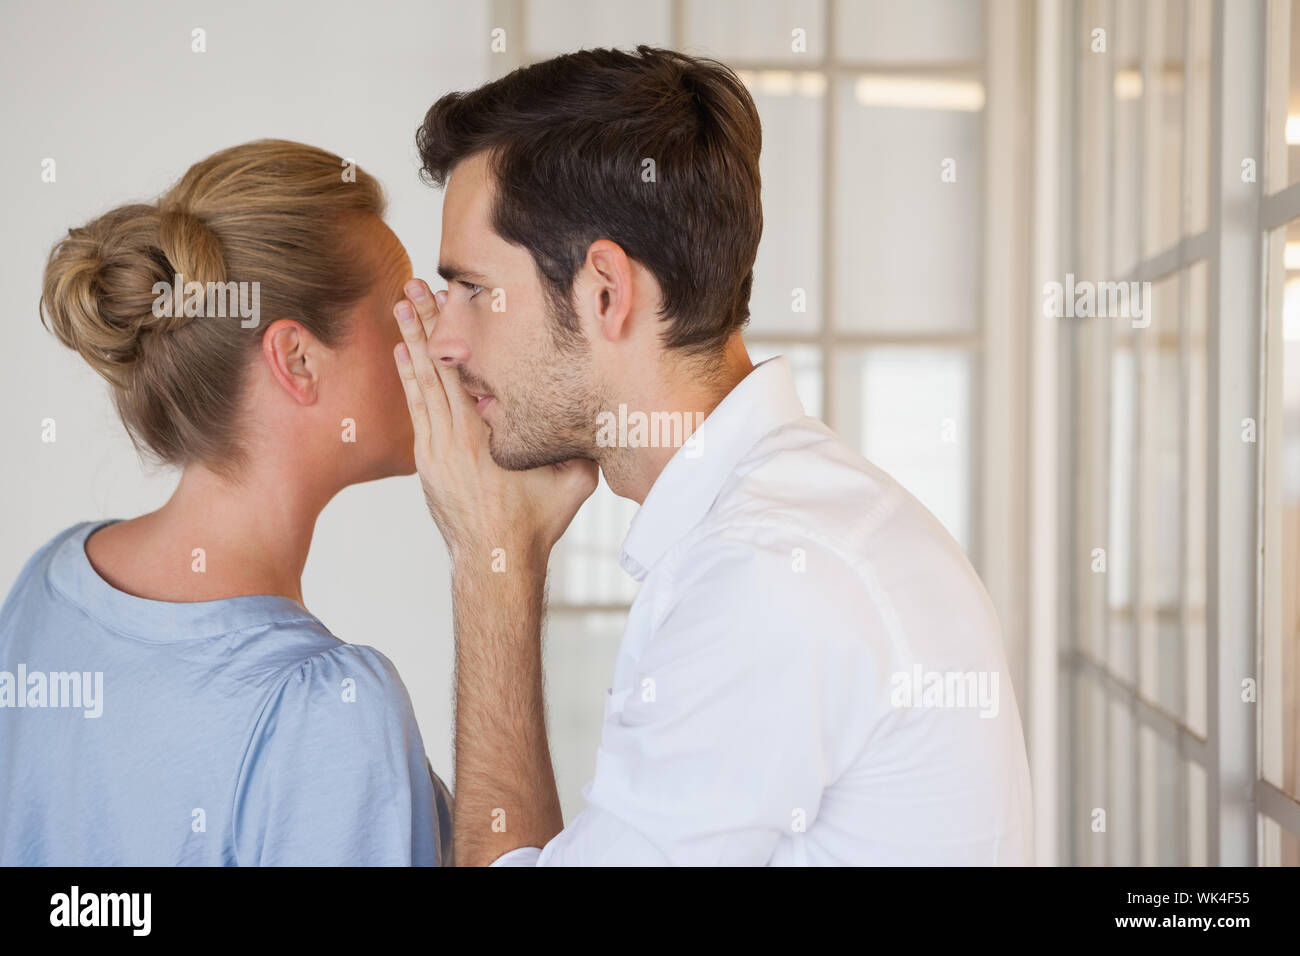 Casual Business People Gossiping Together In The Office Stock Photo Alamy